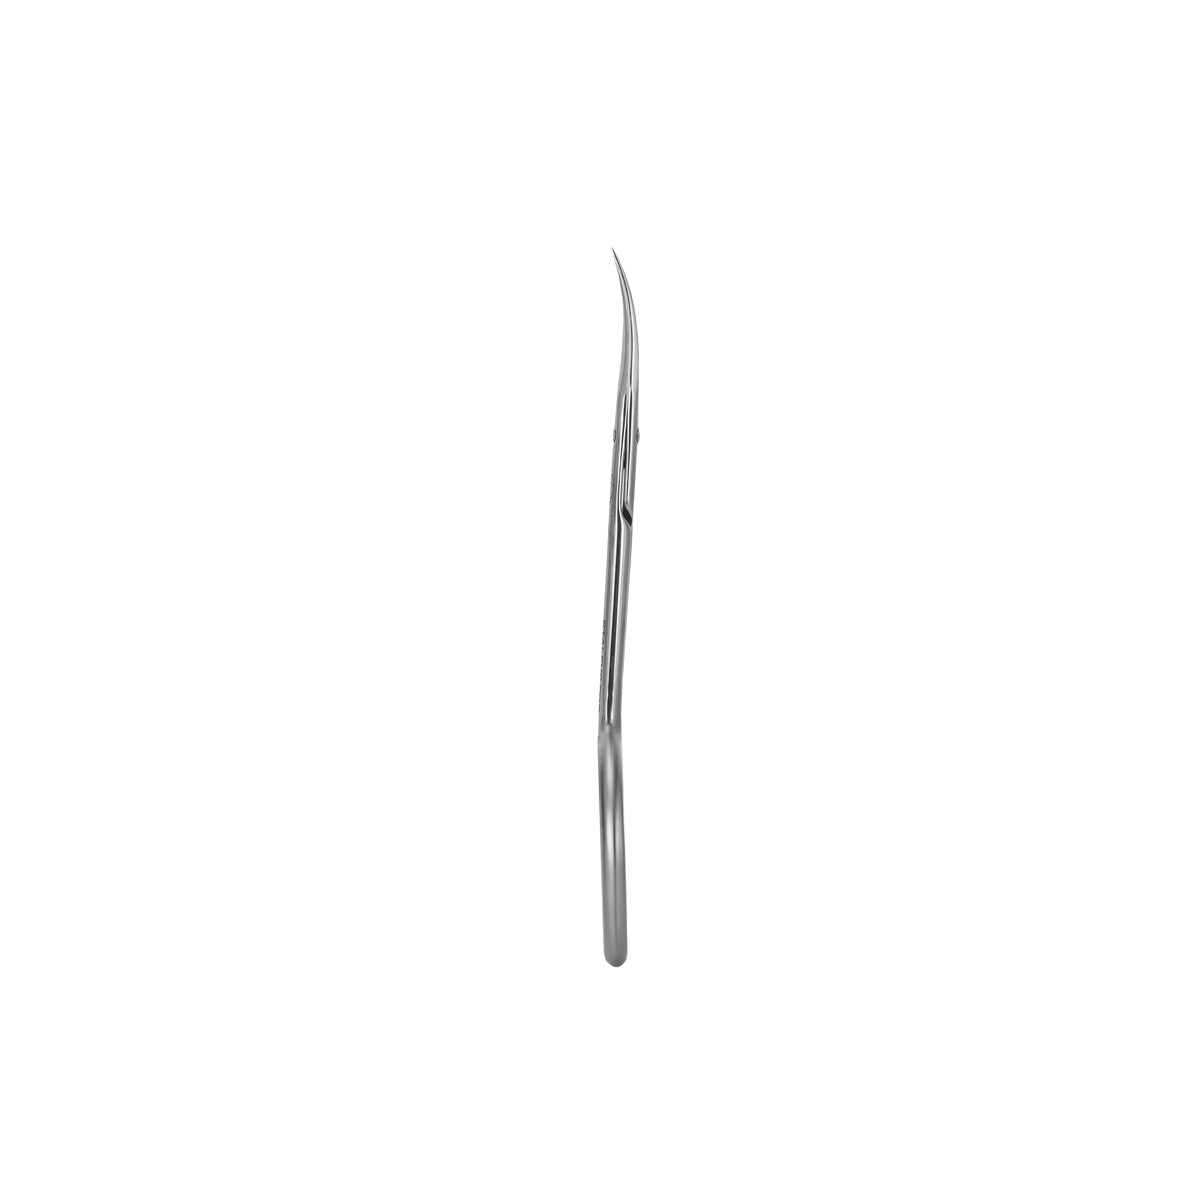    Staleks_Professional_cuticle_scissors_Exc._20_TYPE_2_Magnol._SX-20_2M_5 product view side